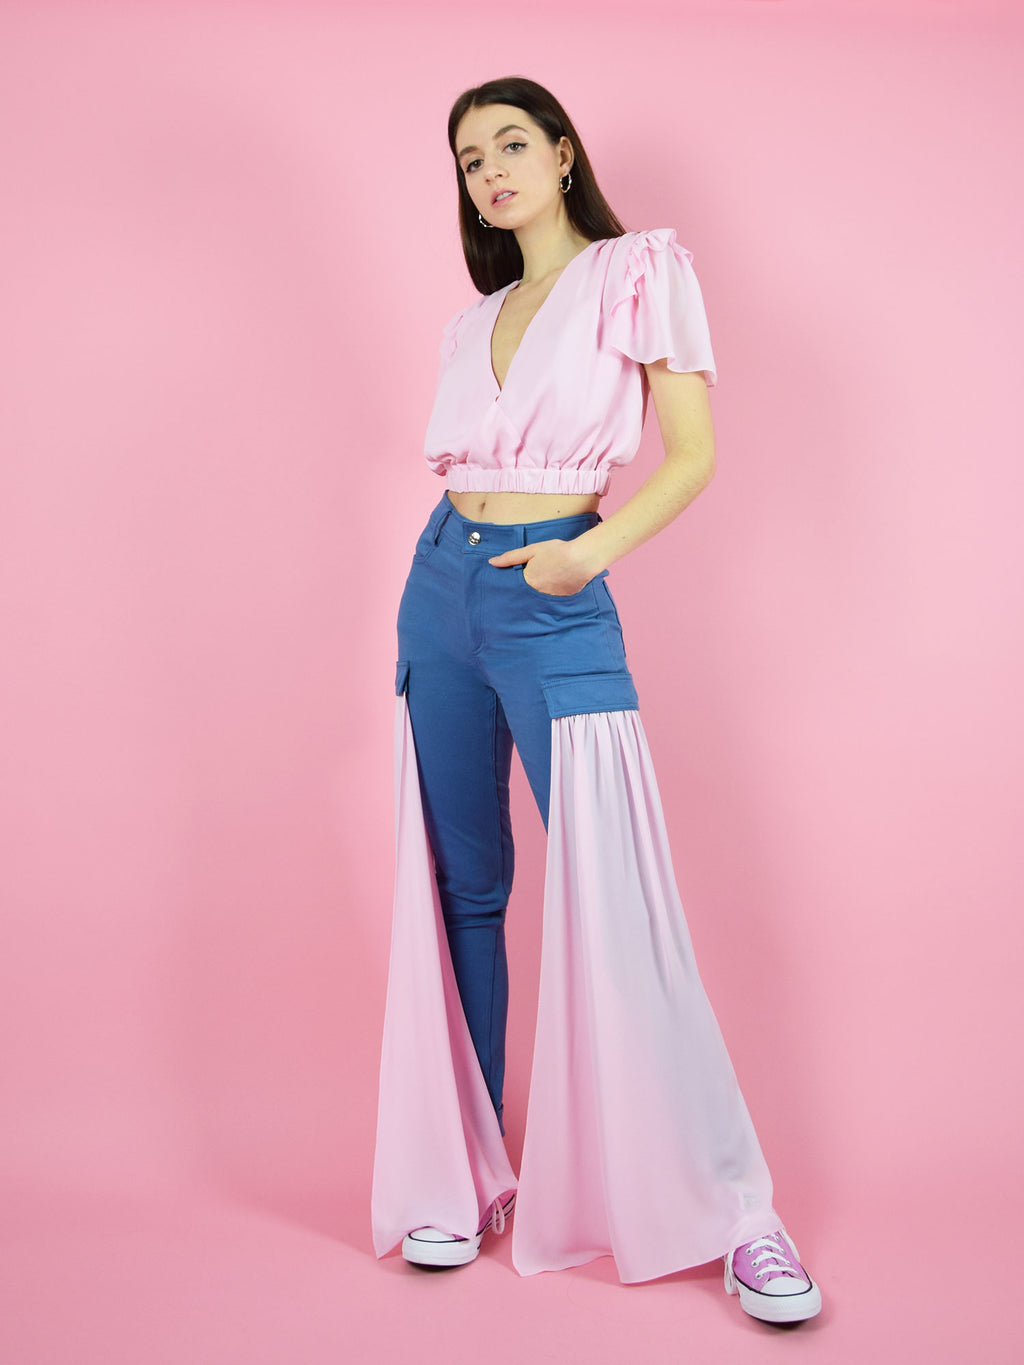 An amazing summer outfit by blonde gone rogue - the wildflower surplice crop top and the sustainable high-waisted skinny jeans with detachable veils on the side. They come in pink.